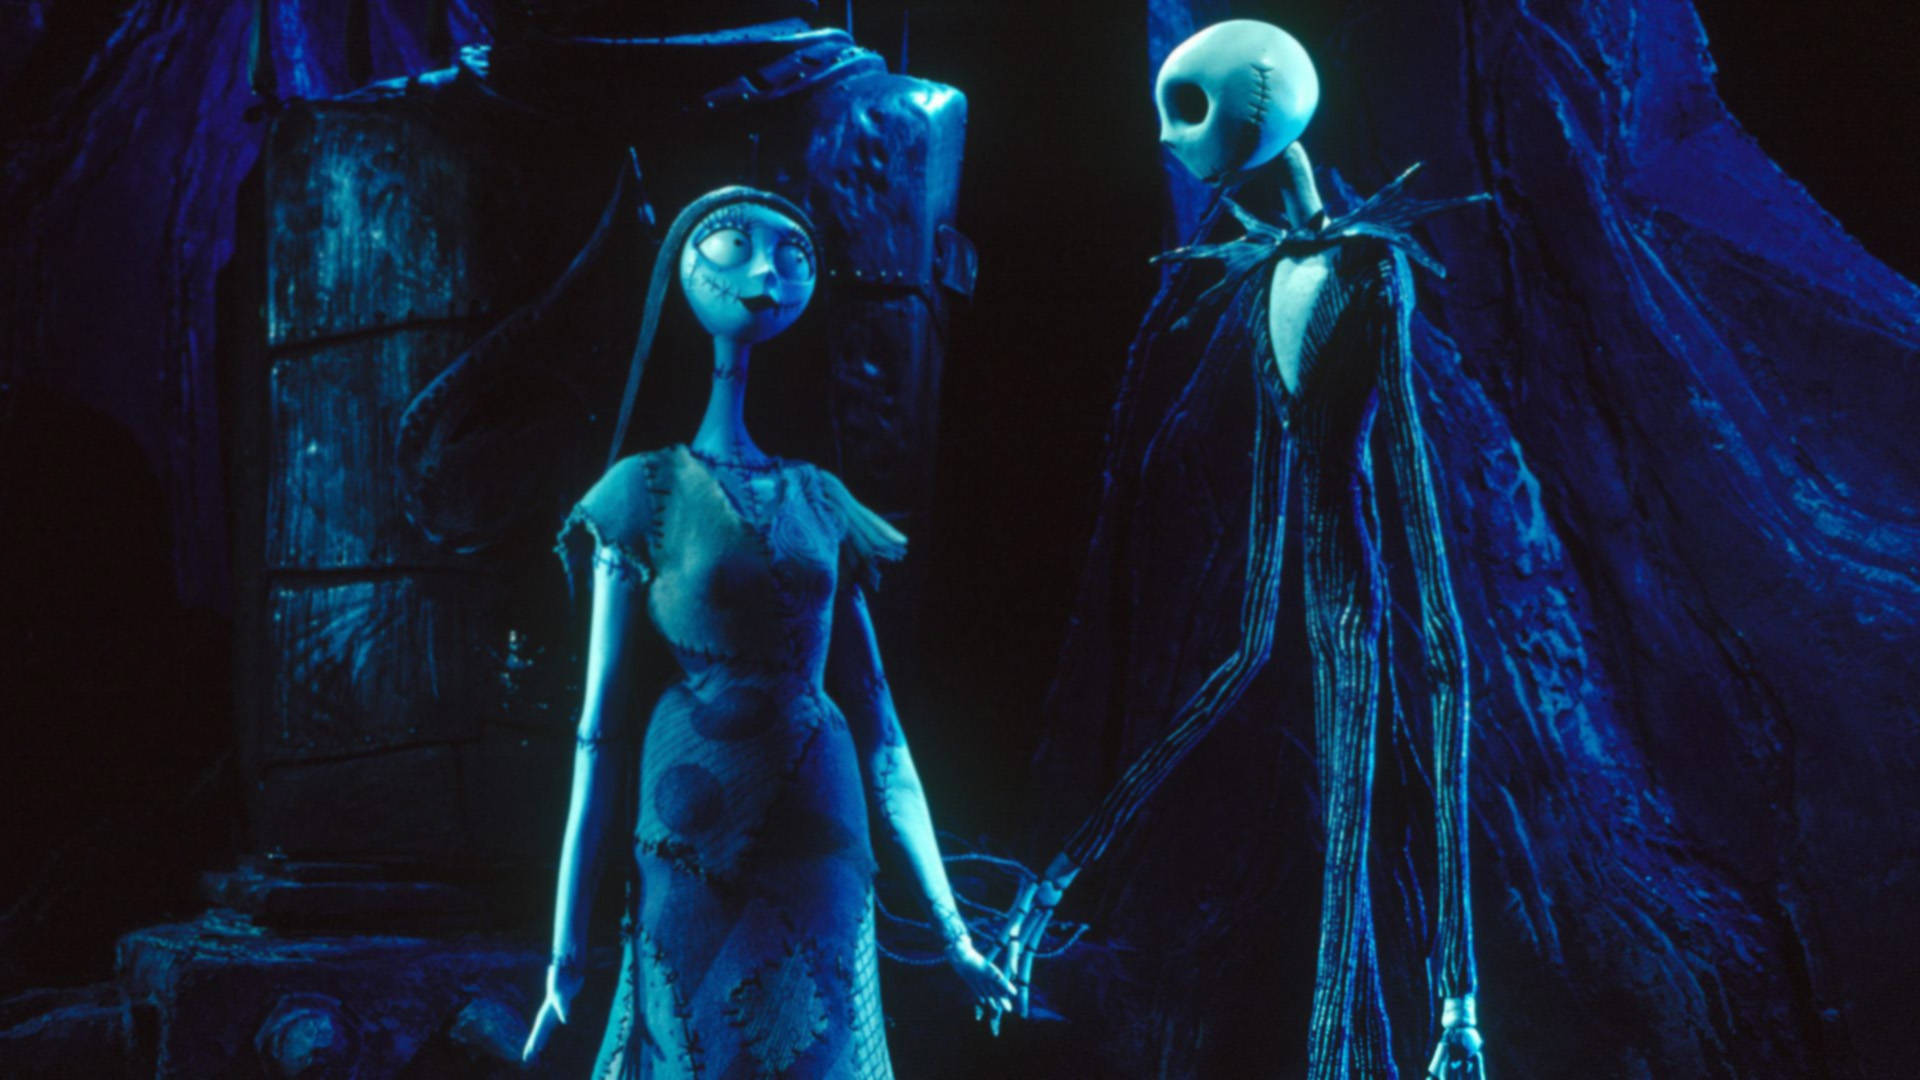 Enchanting Illustration of Jack and Sally From Tim Burton's Masterpiece Wallpaper